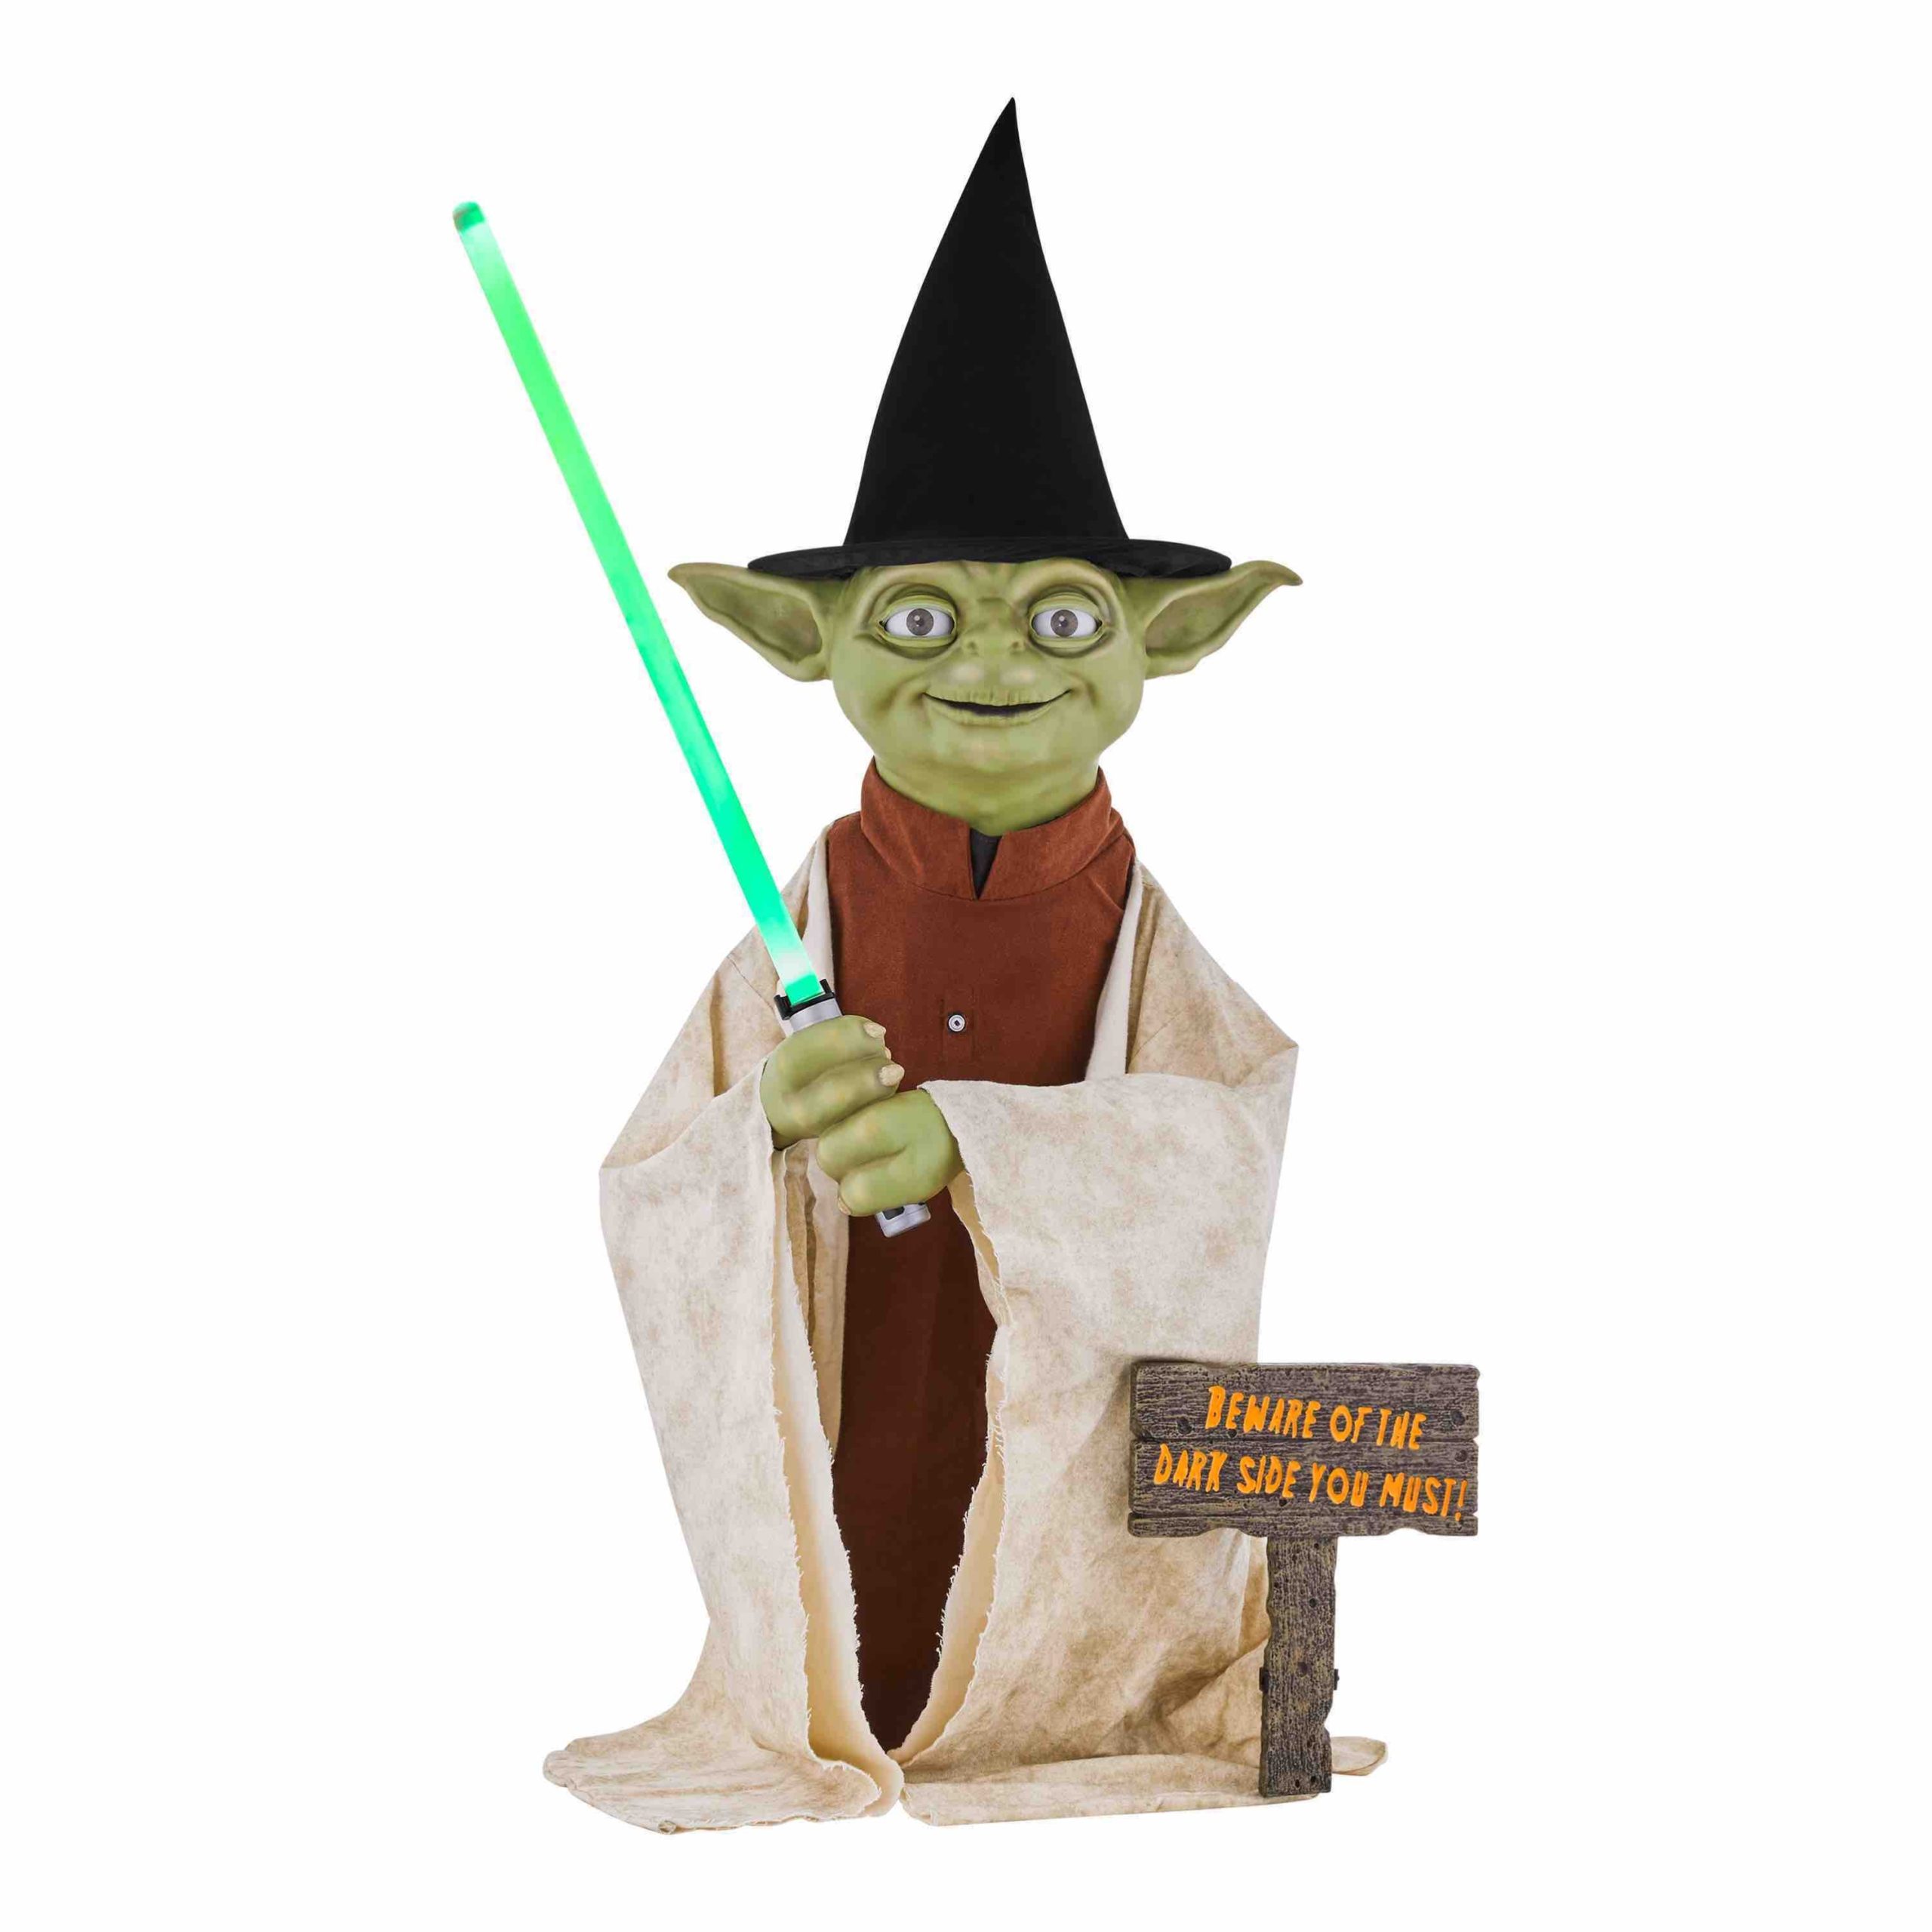 ANIMATED LED YODA Is One Of The Best And The Most Popular Halloween Party Decorations To Buy This Year